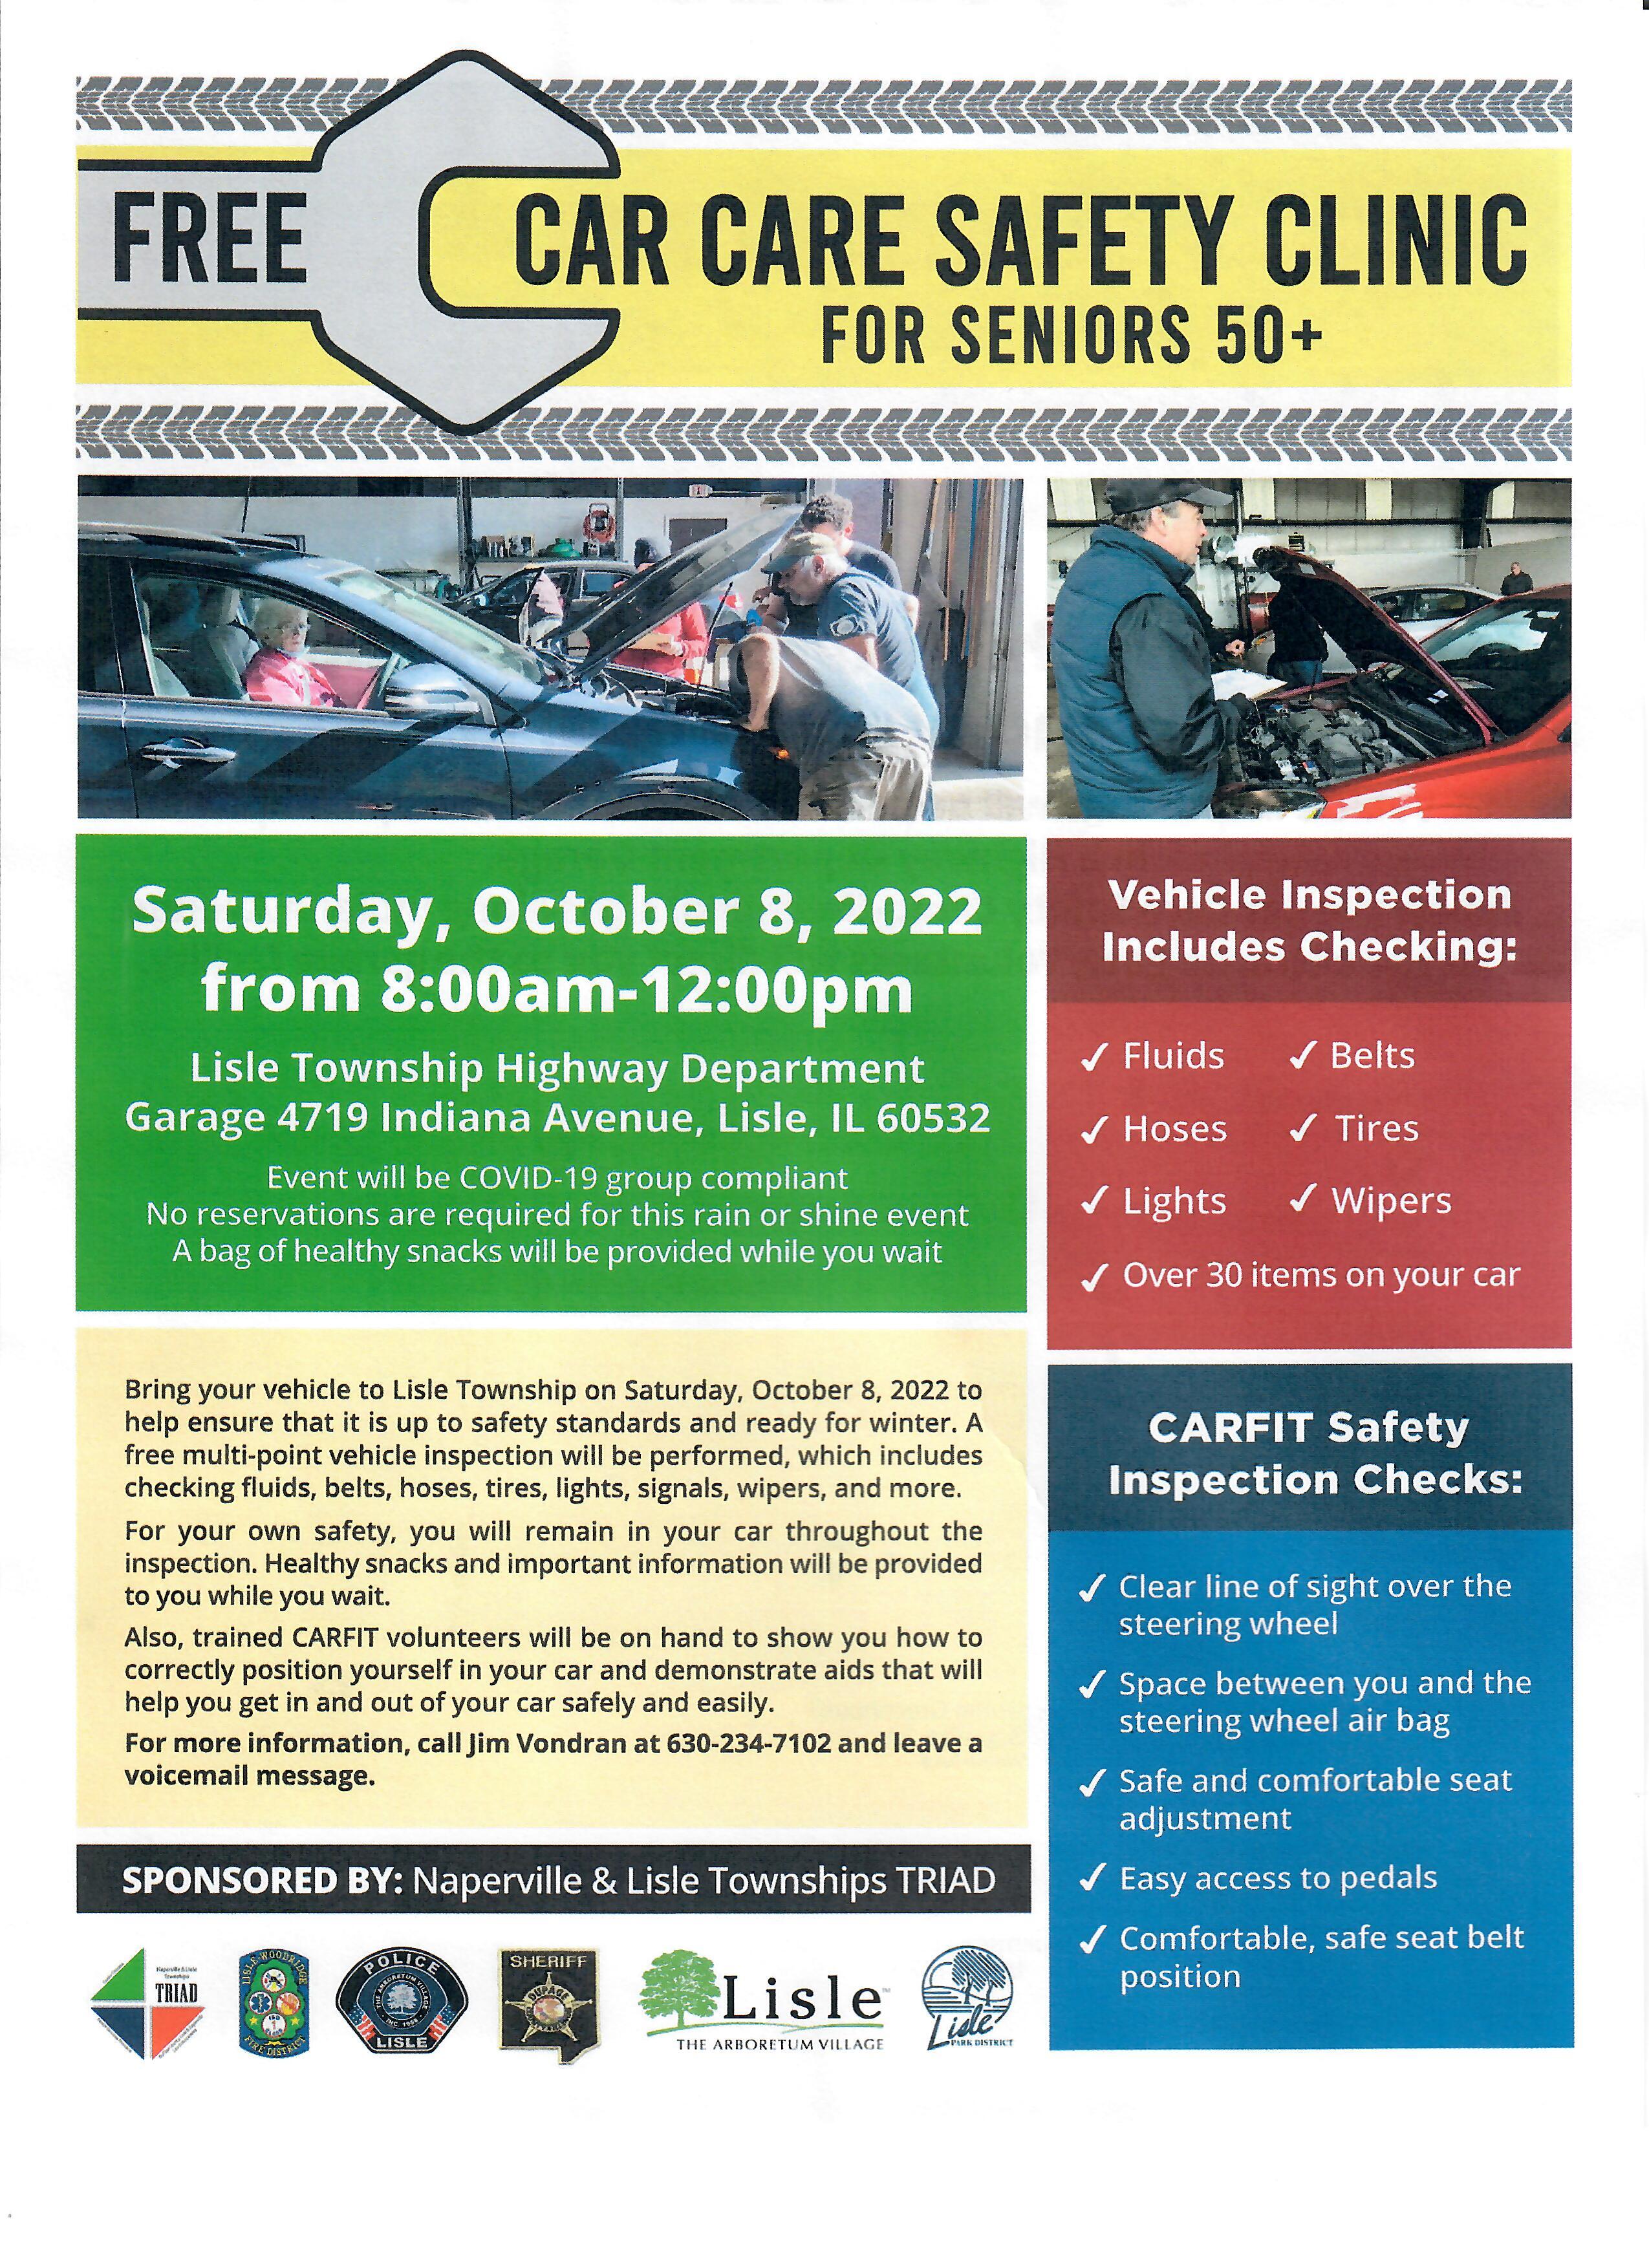 Free Car Care Safety Clinic for Seniors 50+